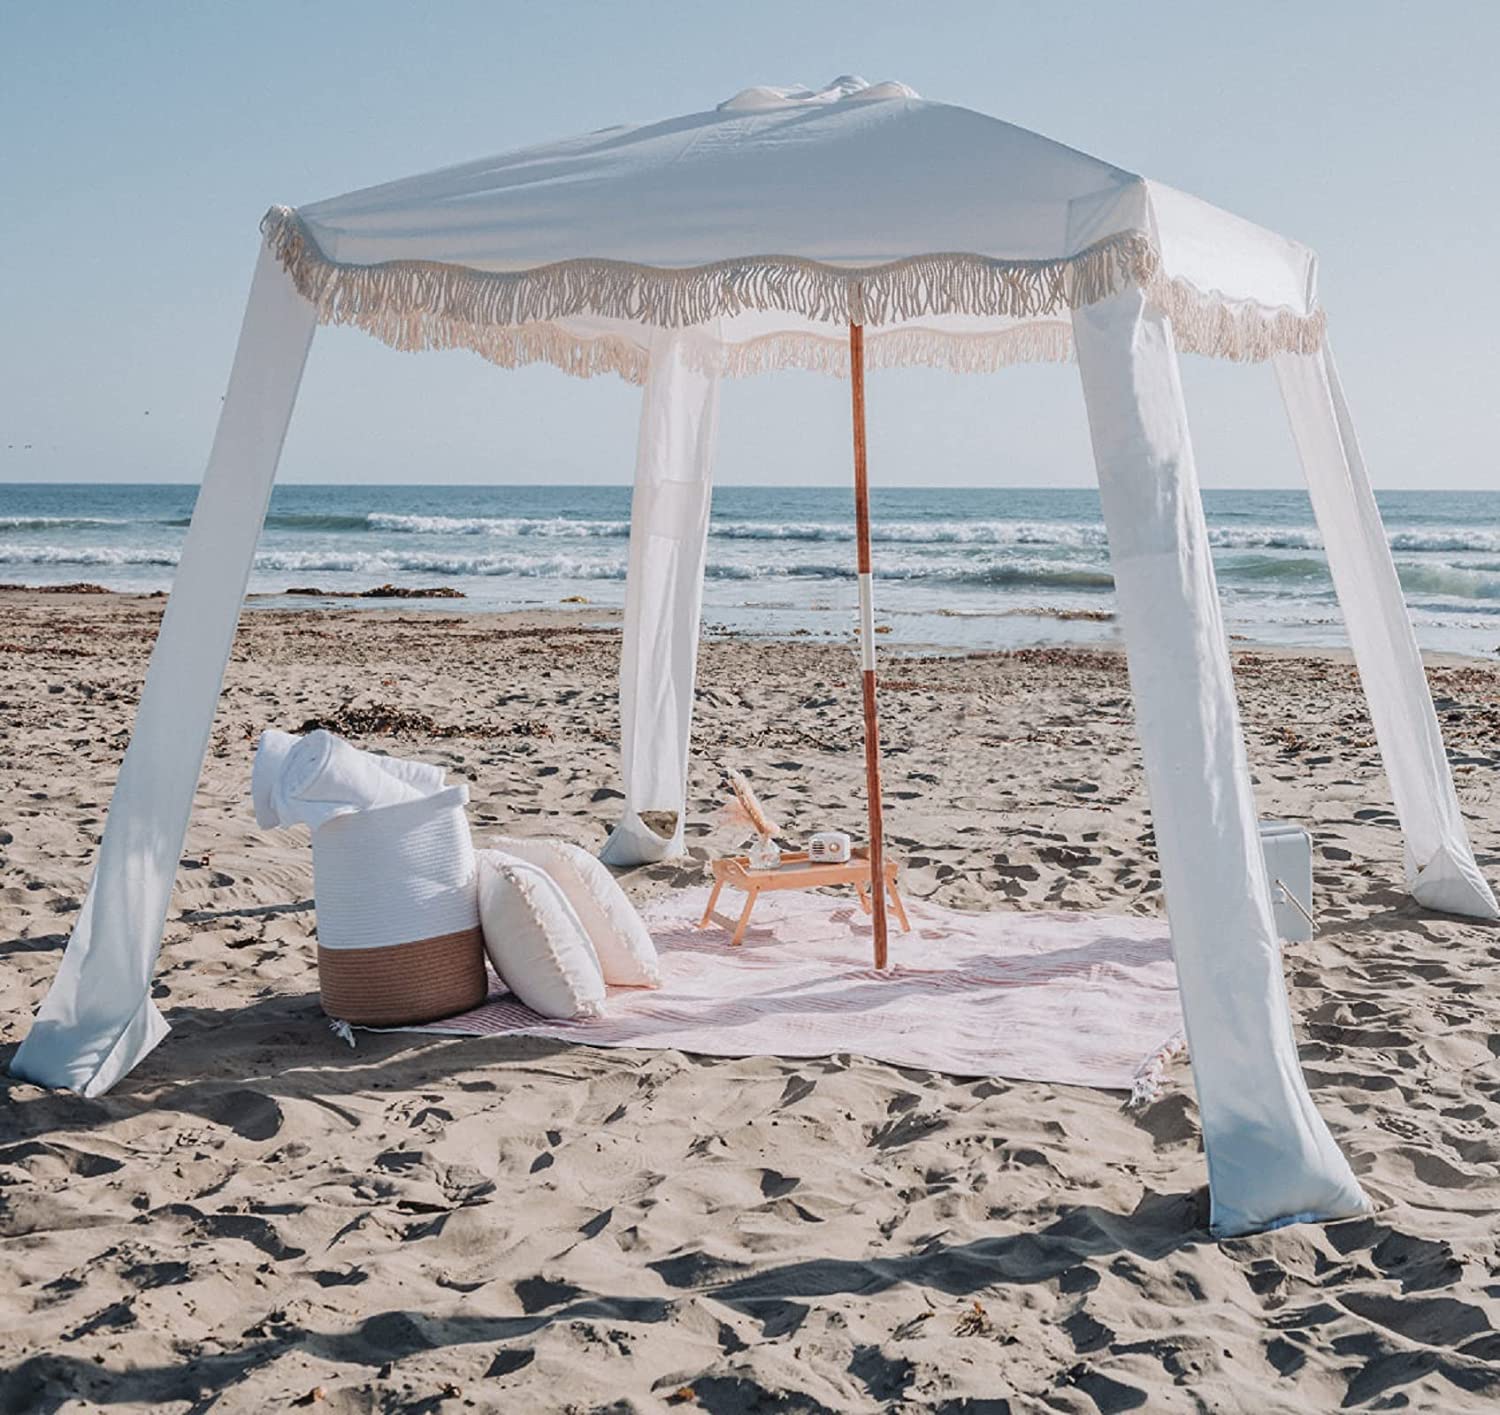 The AMMSUN Beach Cabana with Fringe, a stylish and functional beach shelter, set up on a sandy beach with a breathtaking ocean view, featuring a comfortable beach chair nearby.